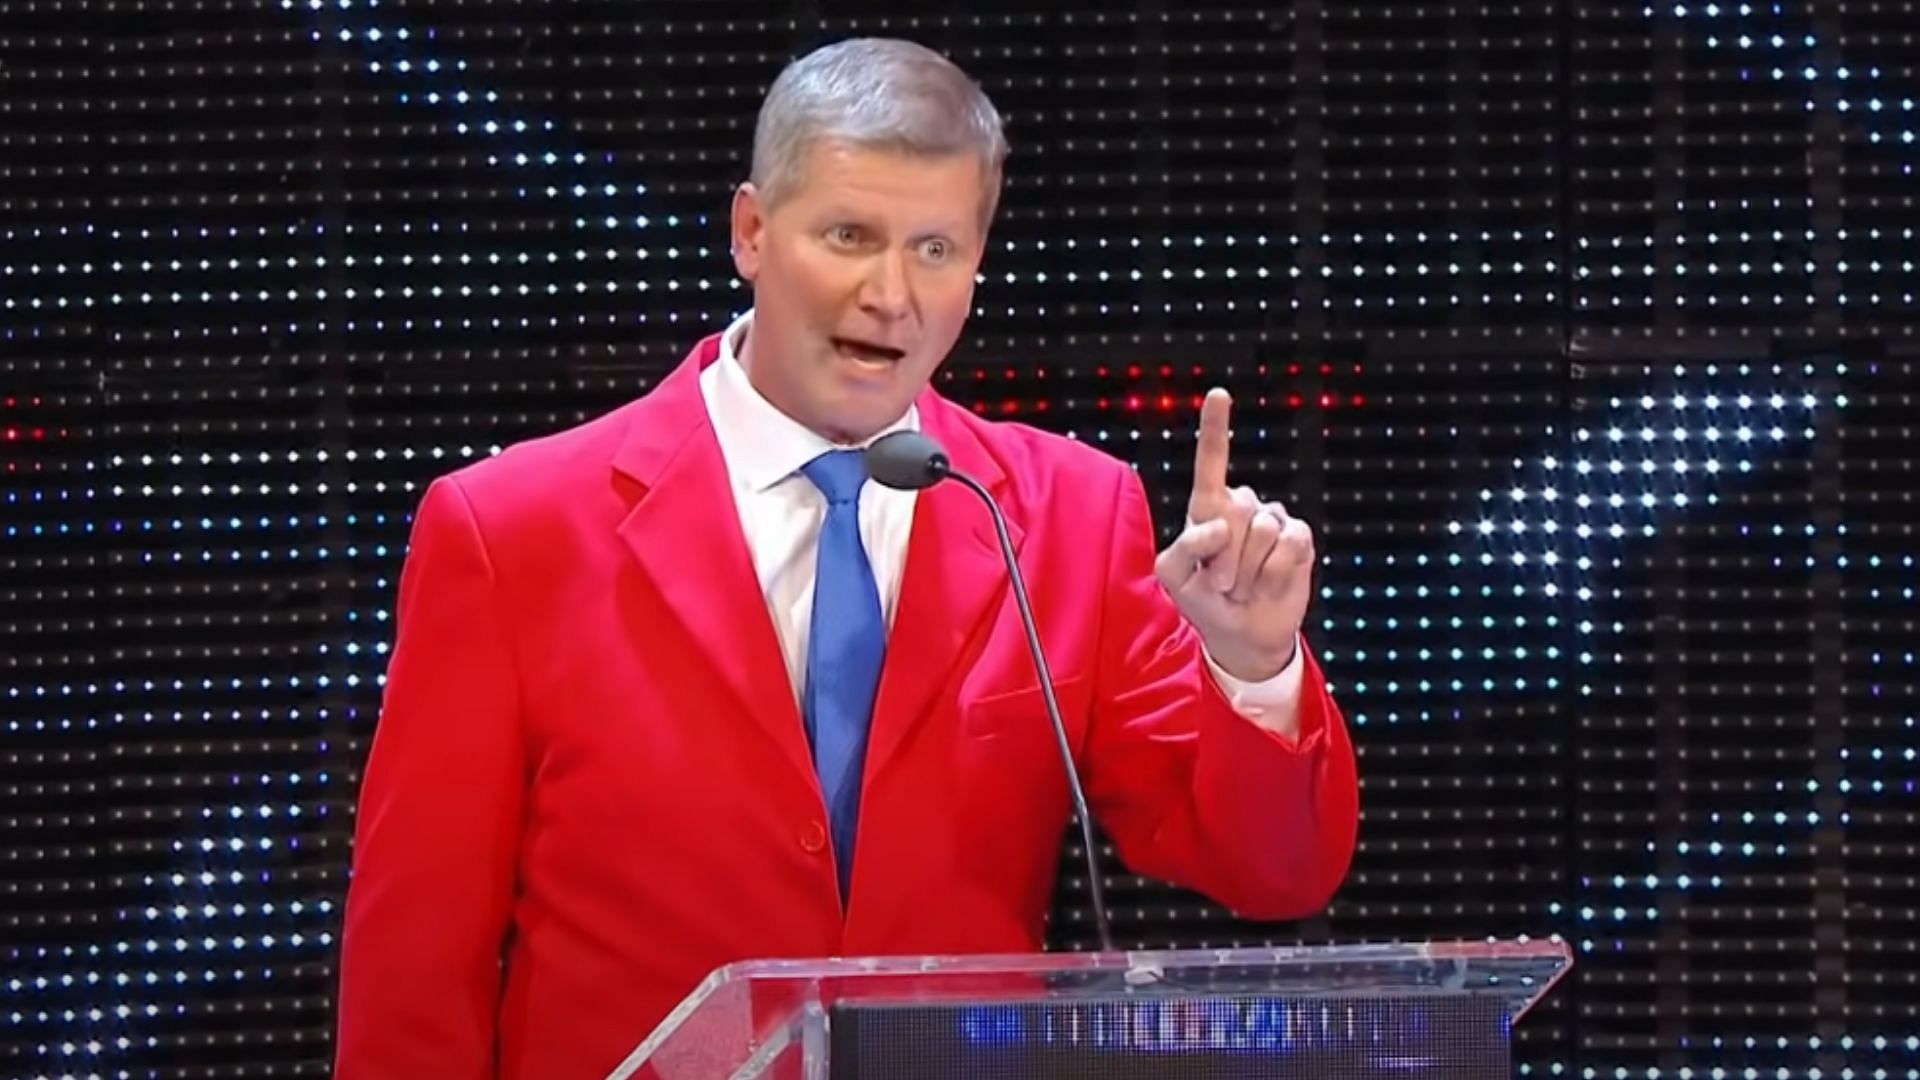 The WWE executive has worked for Vince McMahon since 2001.